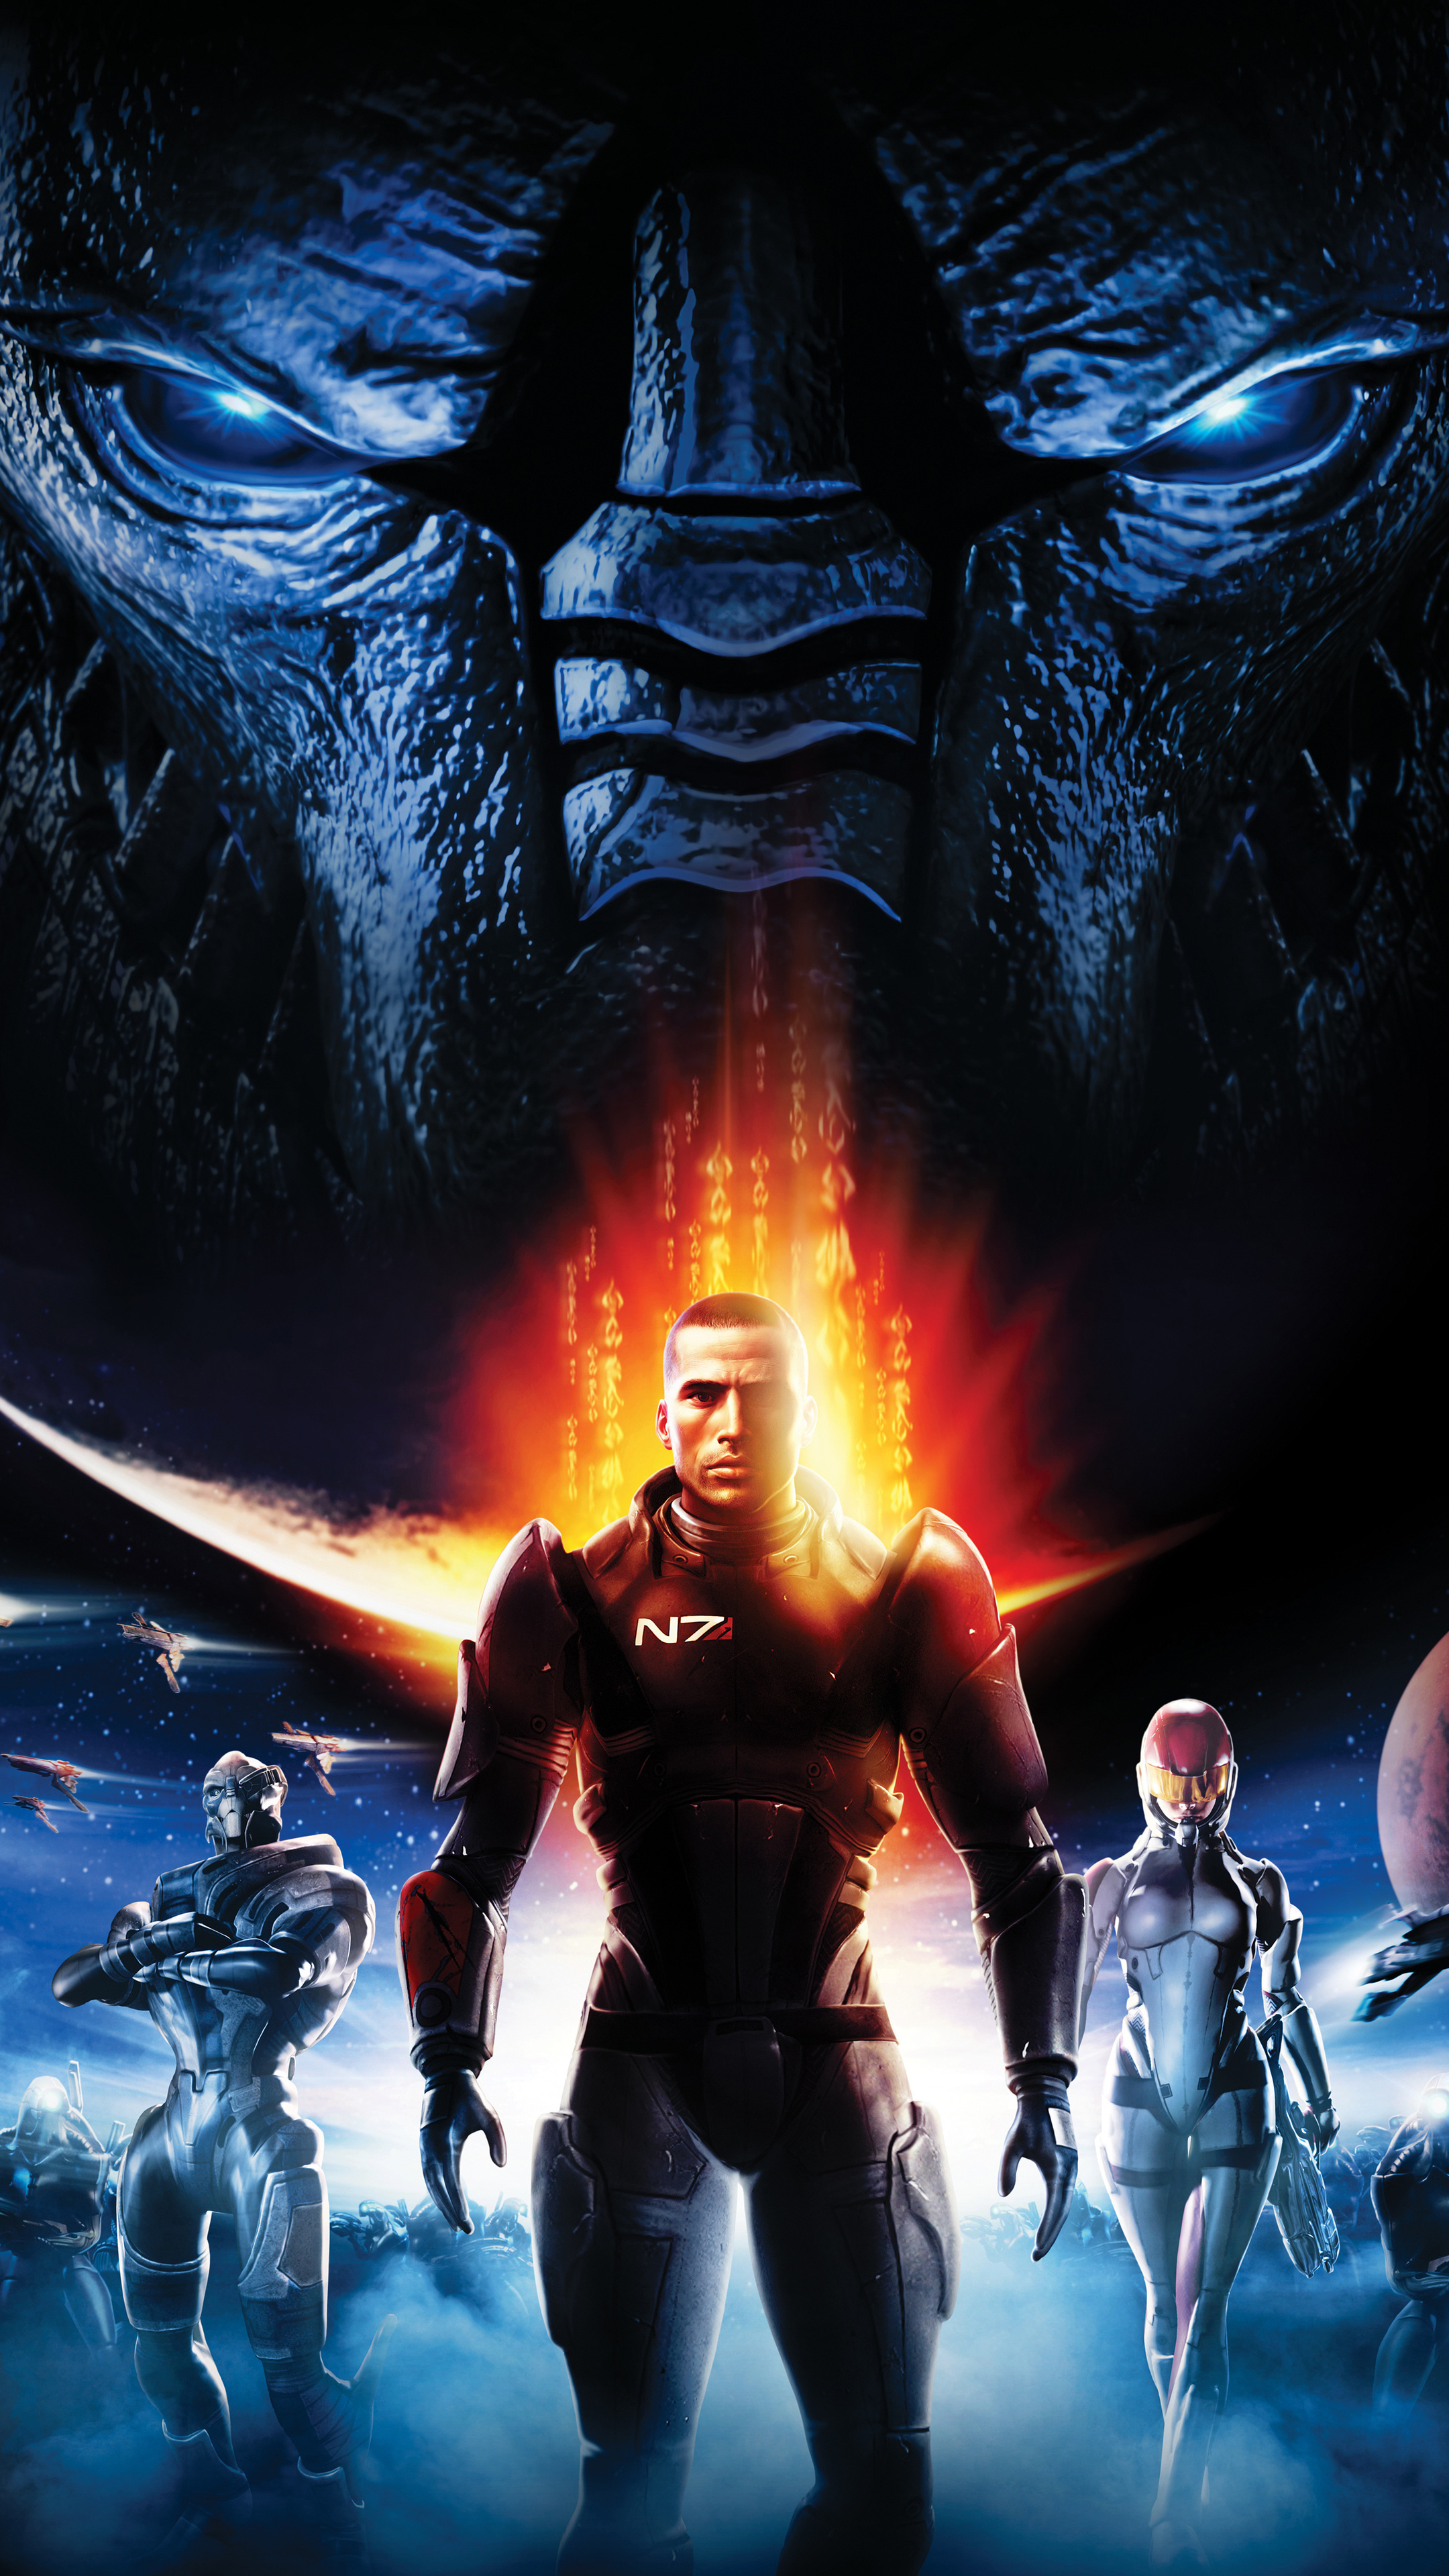 Mass Effect, Classic 8K wallpapers, Sony Xperia HD, Nostalgic gaming vibes, 2160x3840 4K Phone